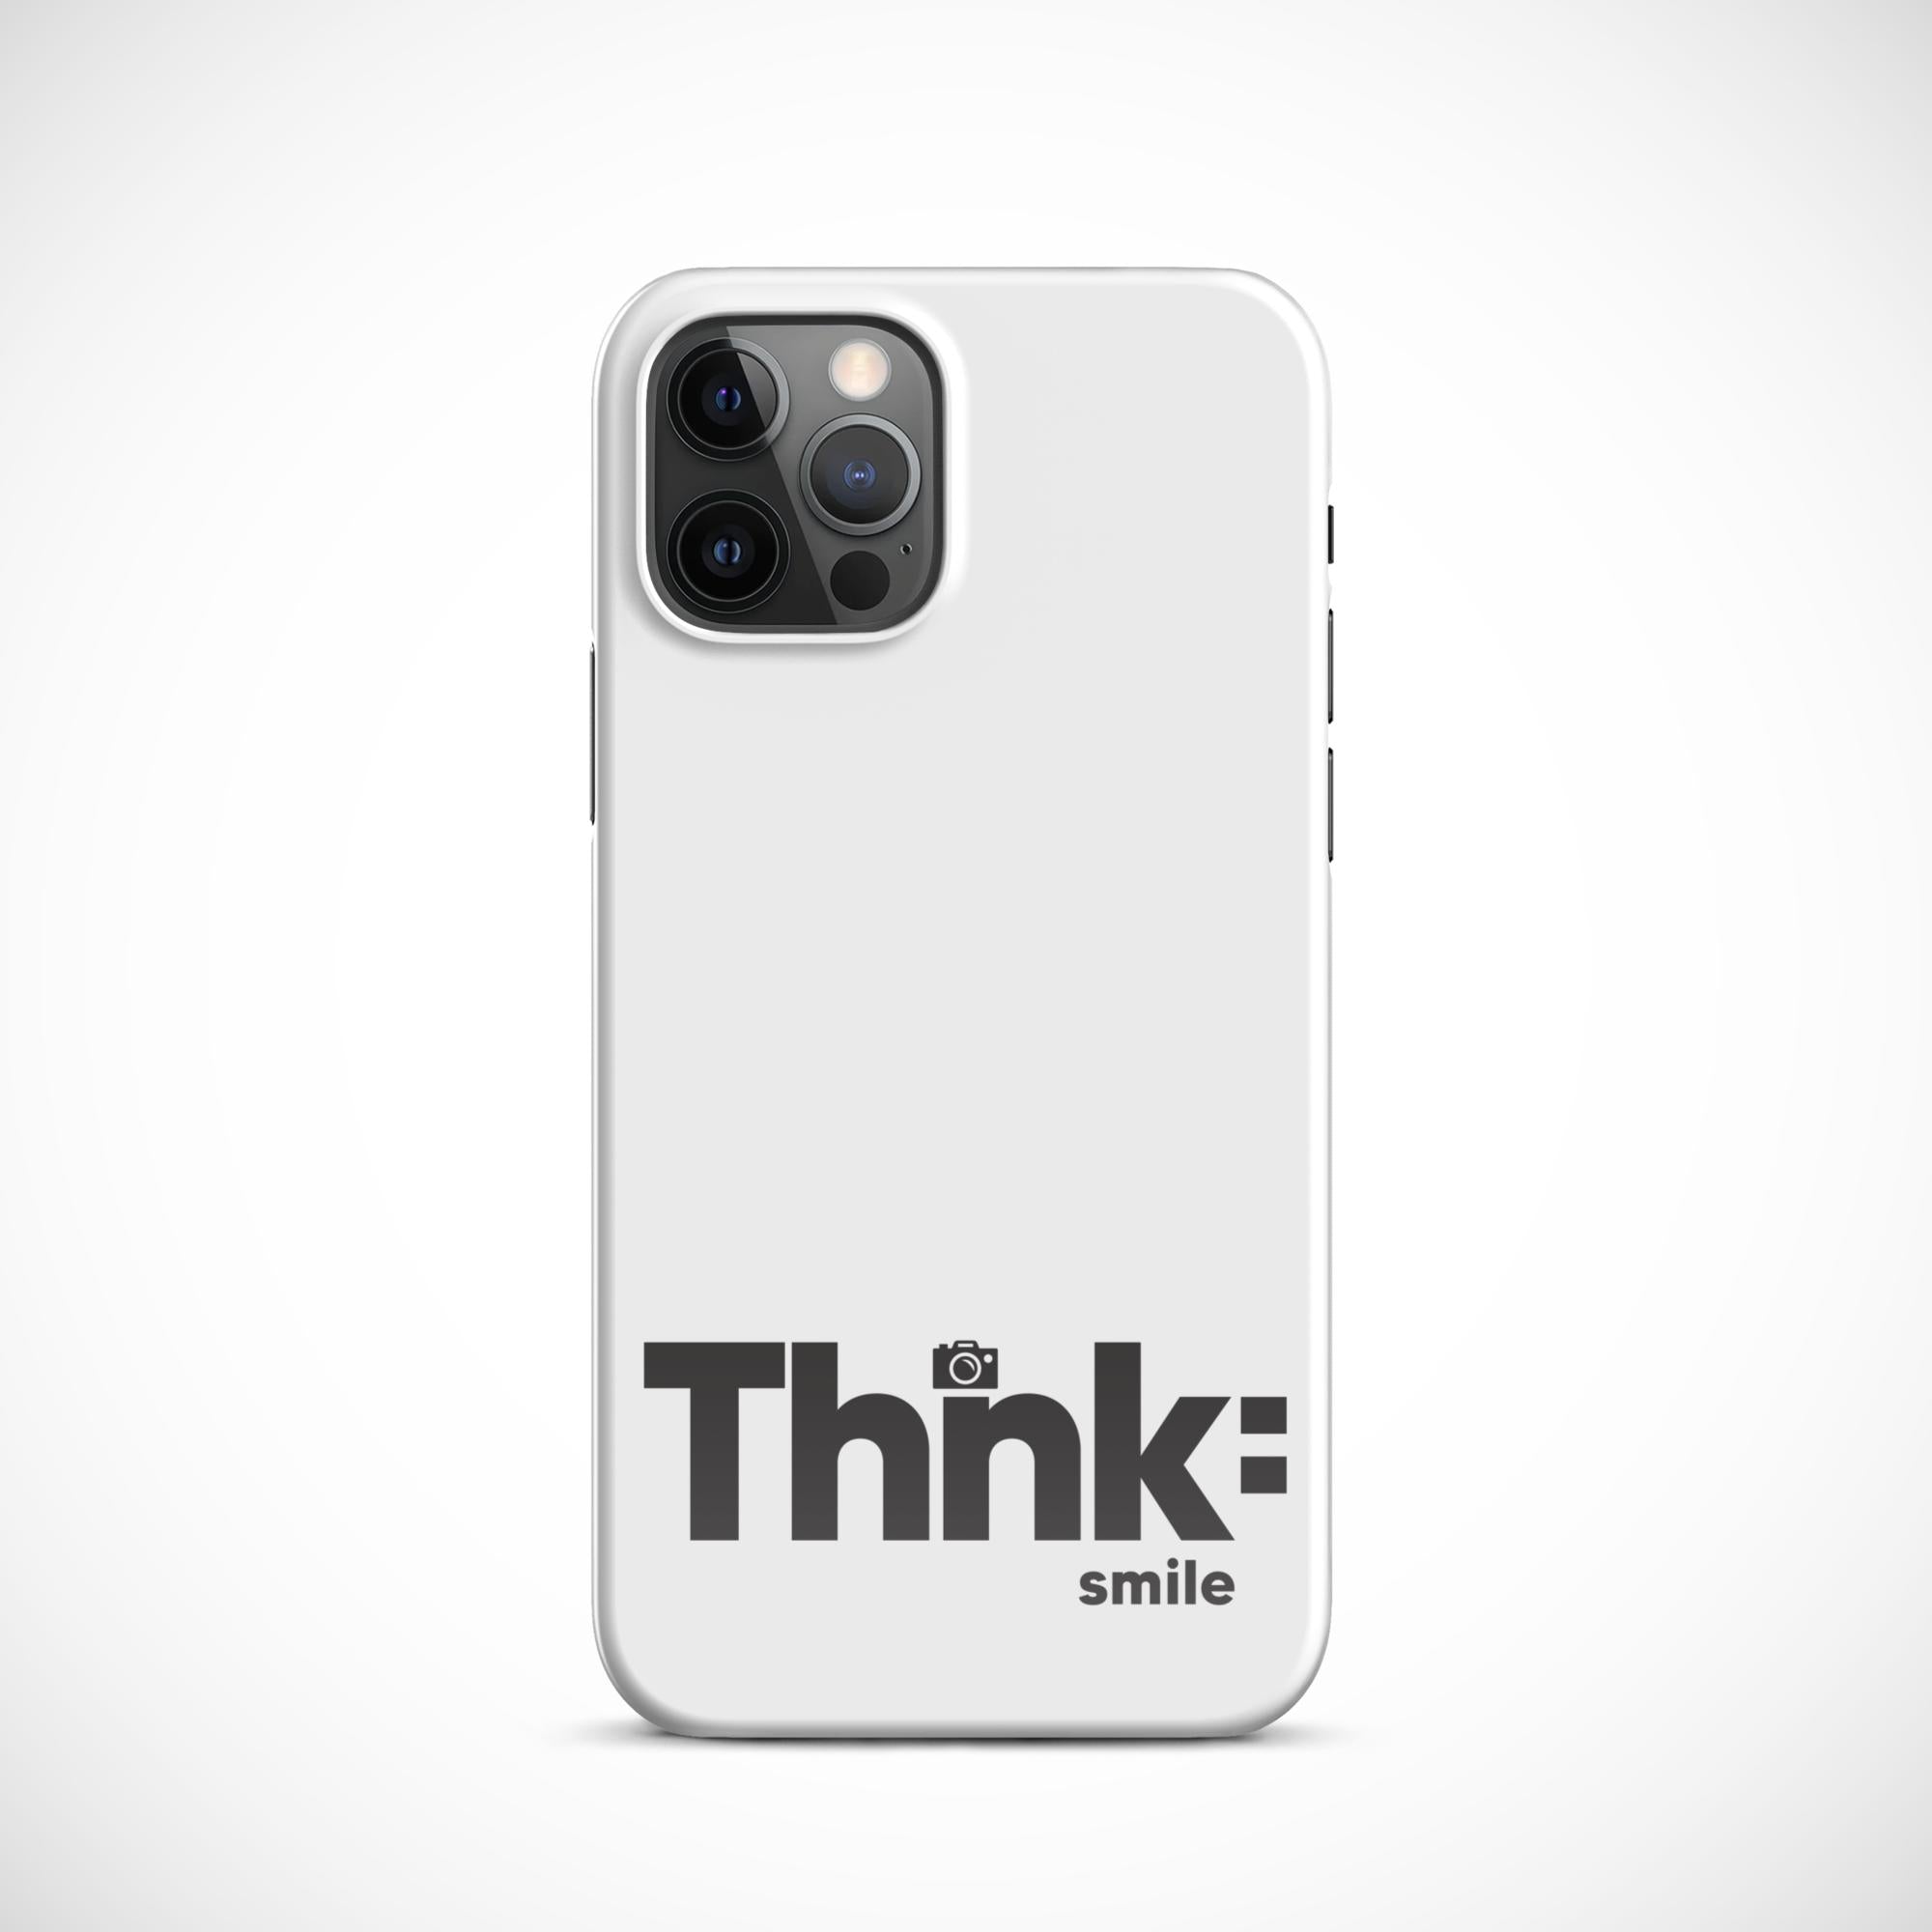 Thnk Smile case For iPhone®